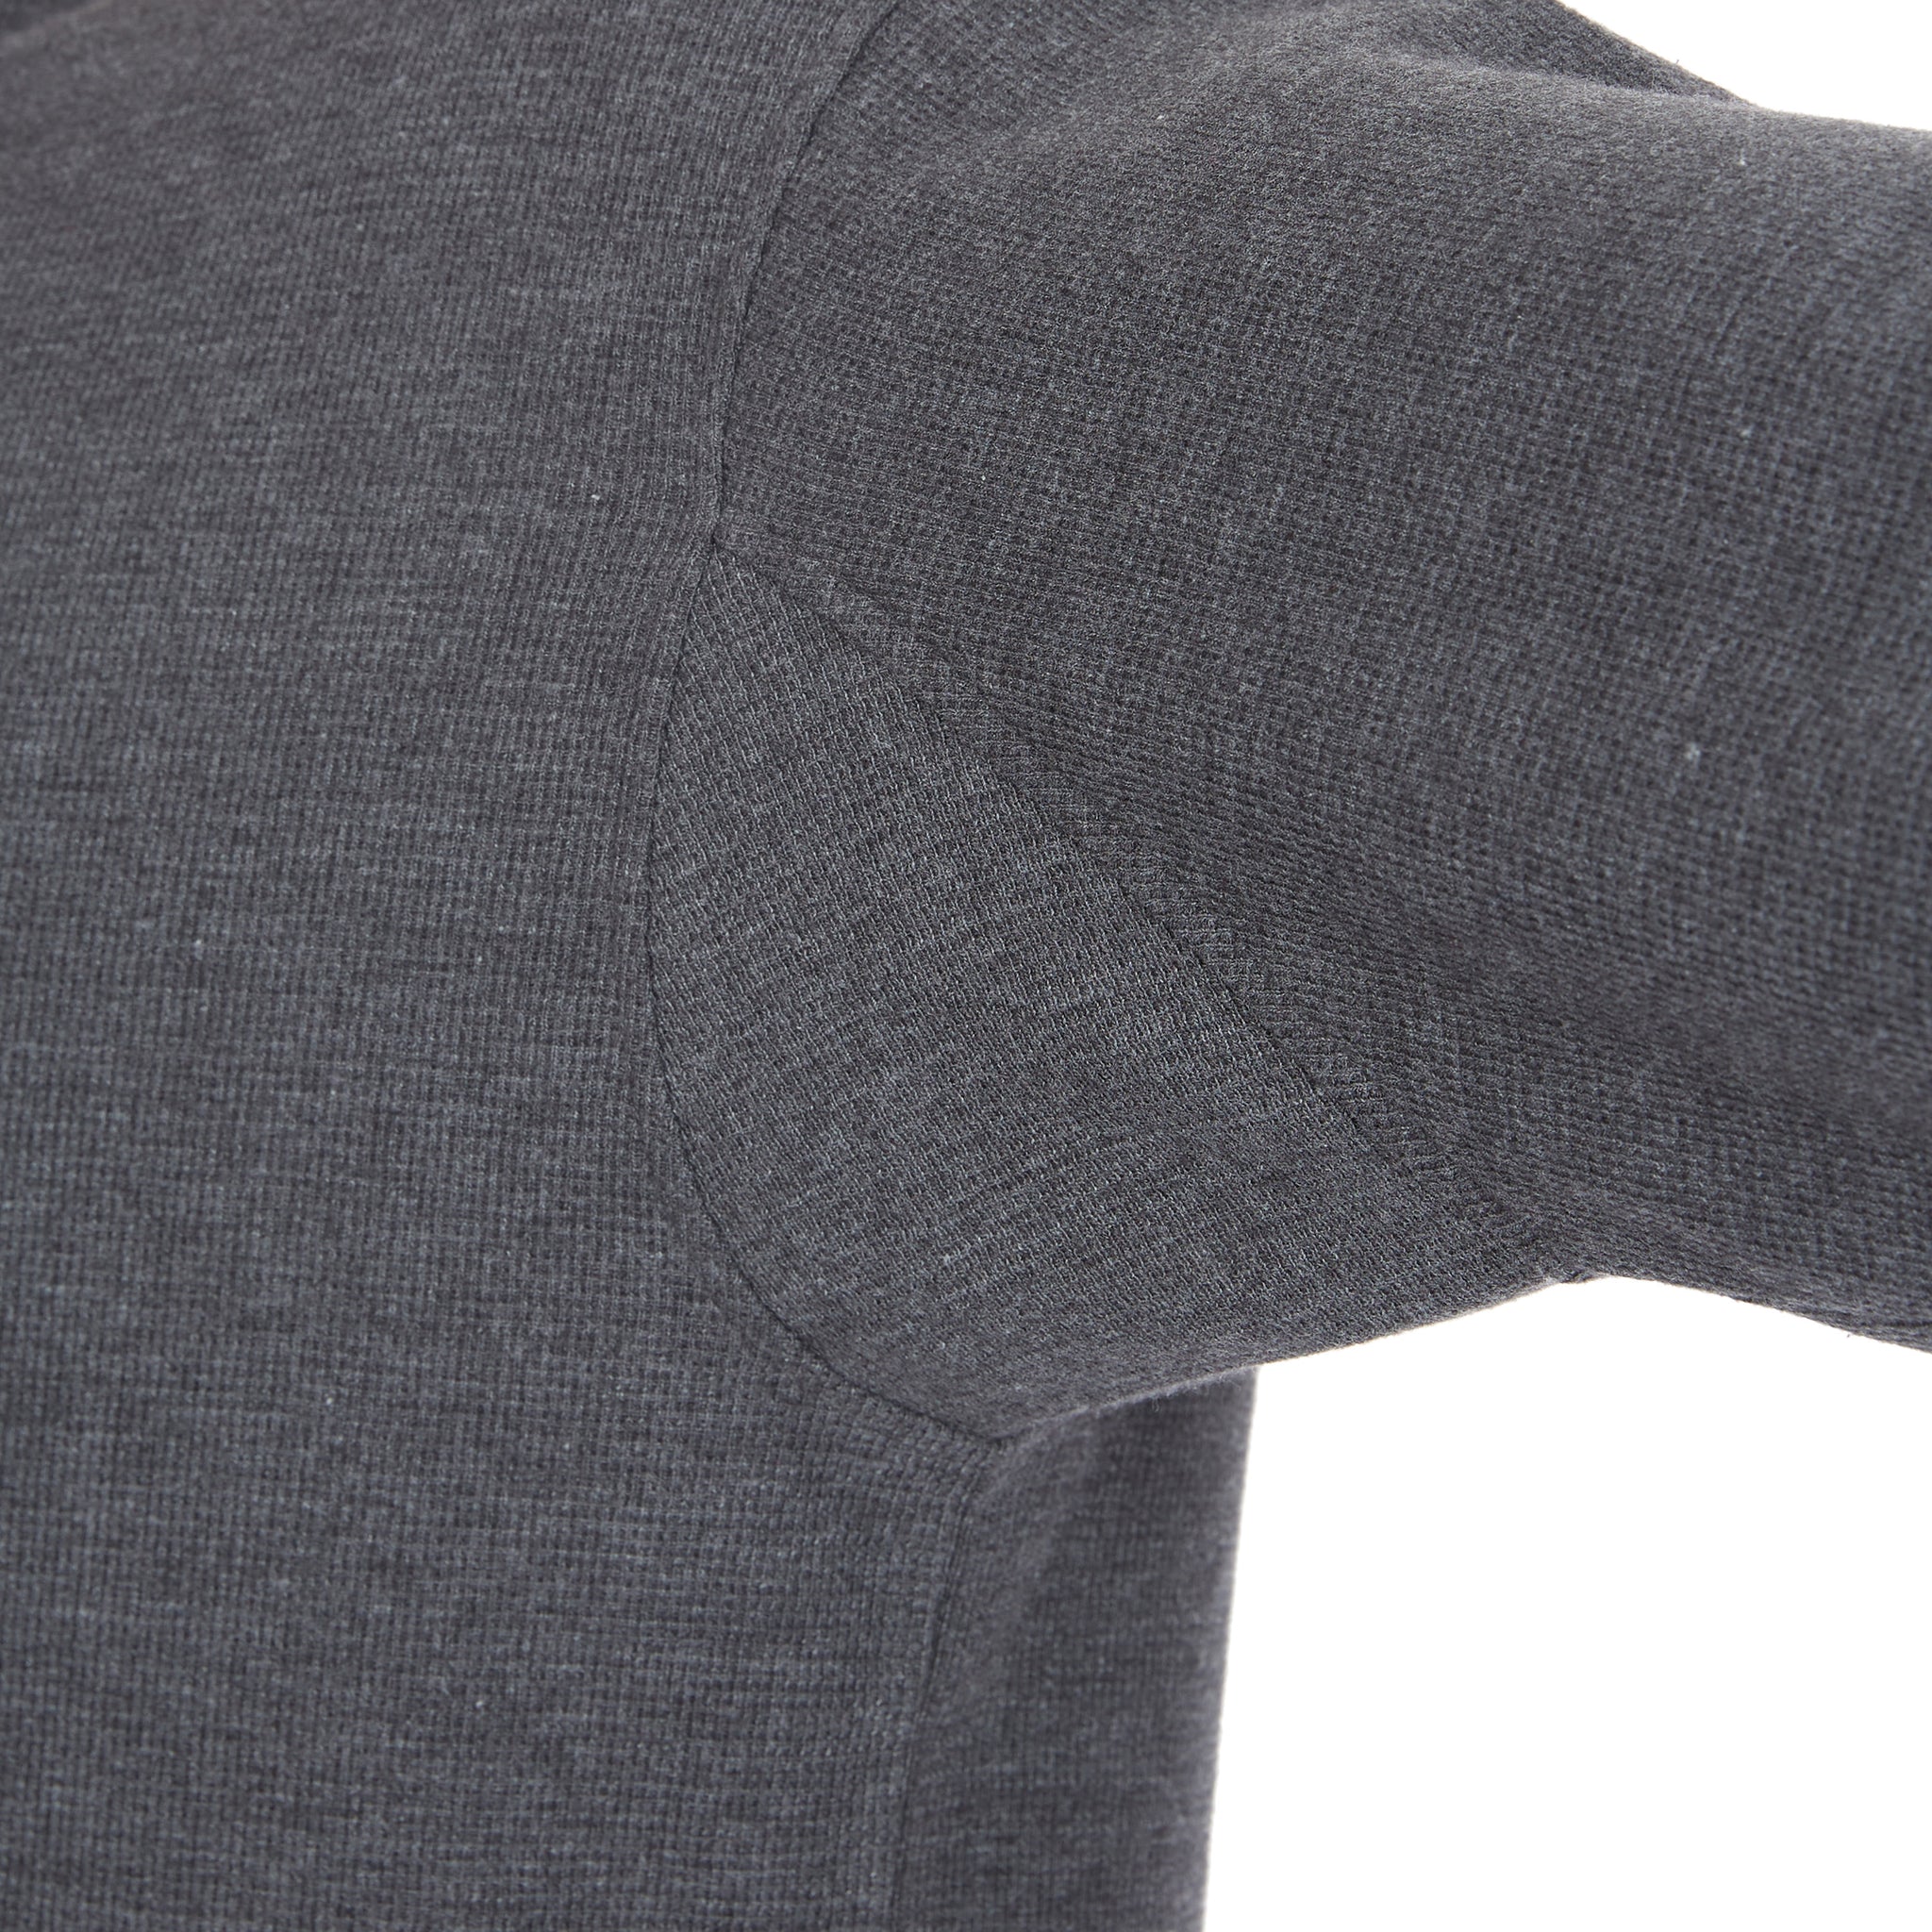 EXTENDED TAIL MINI-THERMAL KNIT HENLEY PULLOVER WITH GUSSET